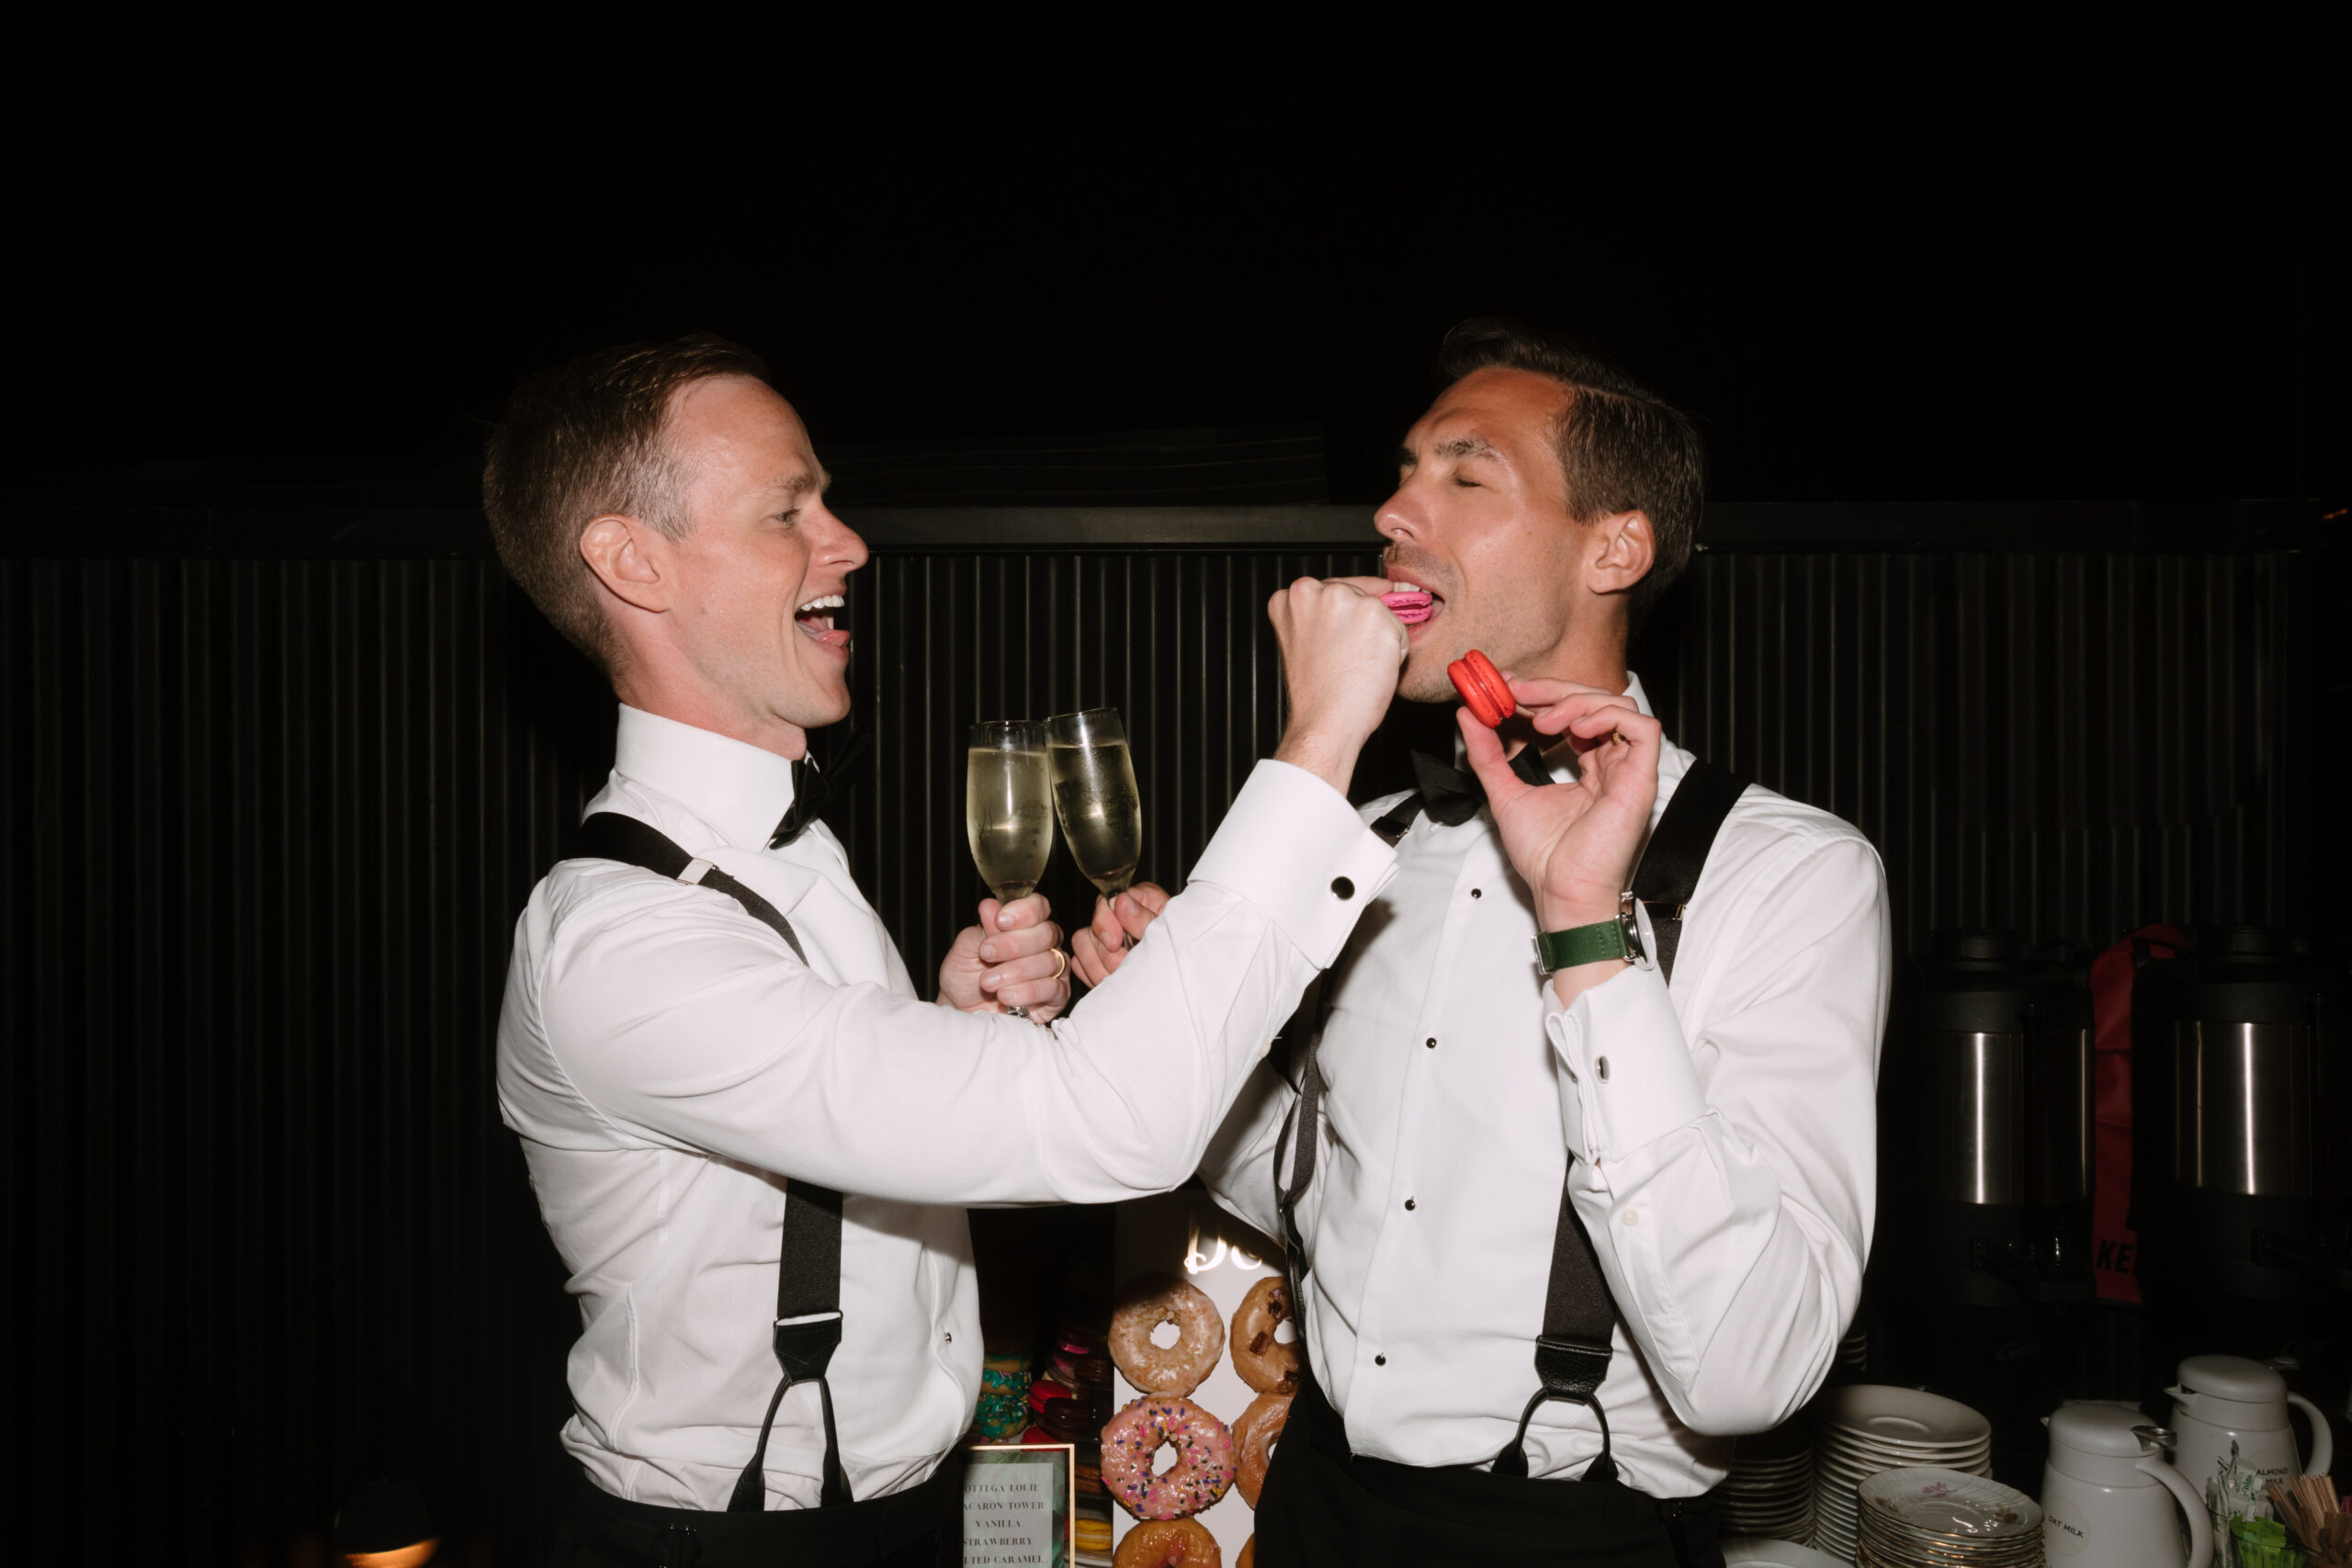 direct flash photo of gay grooms sharing colorful macarons with each other